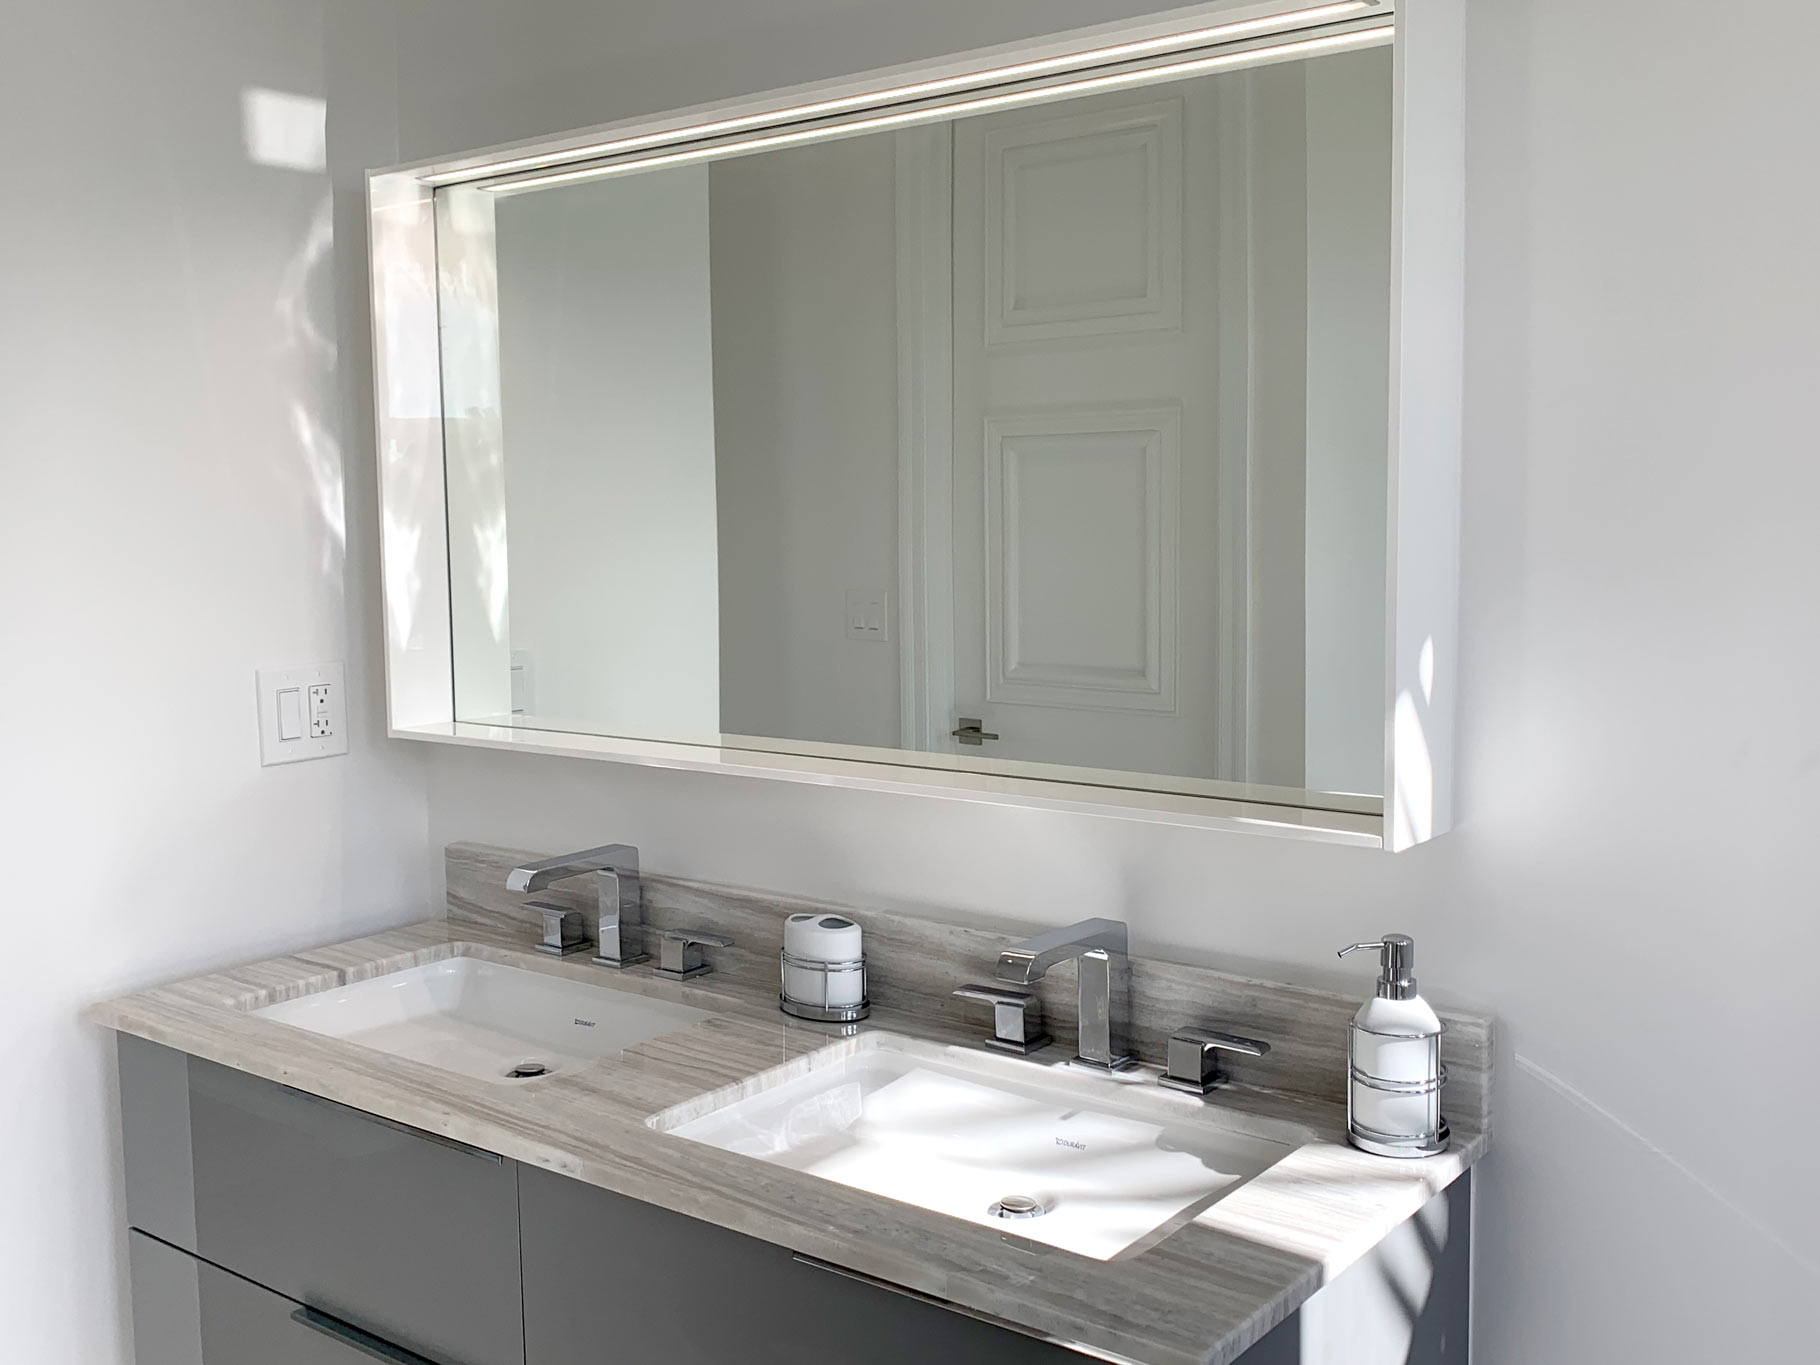 New floating double vanity and wall mounted vanity mirror with lights